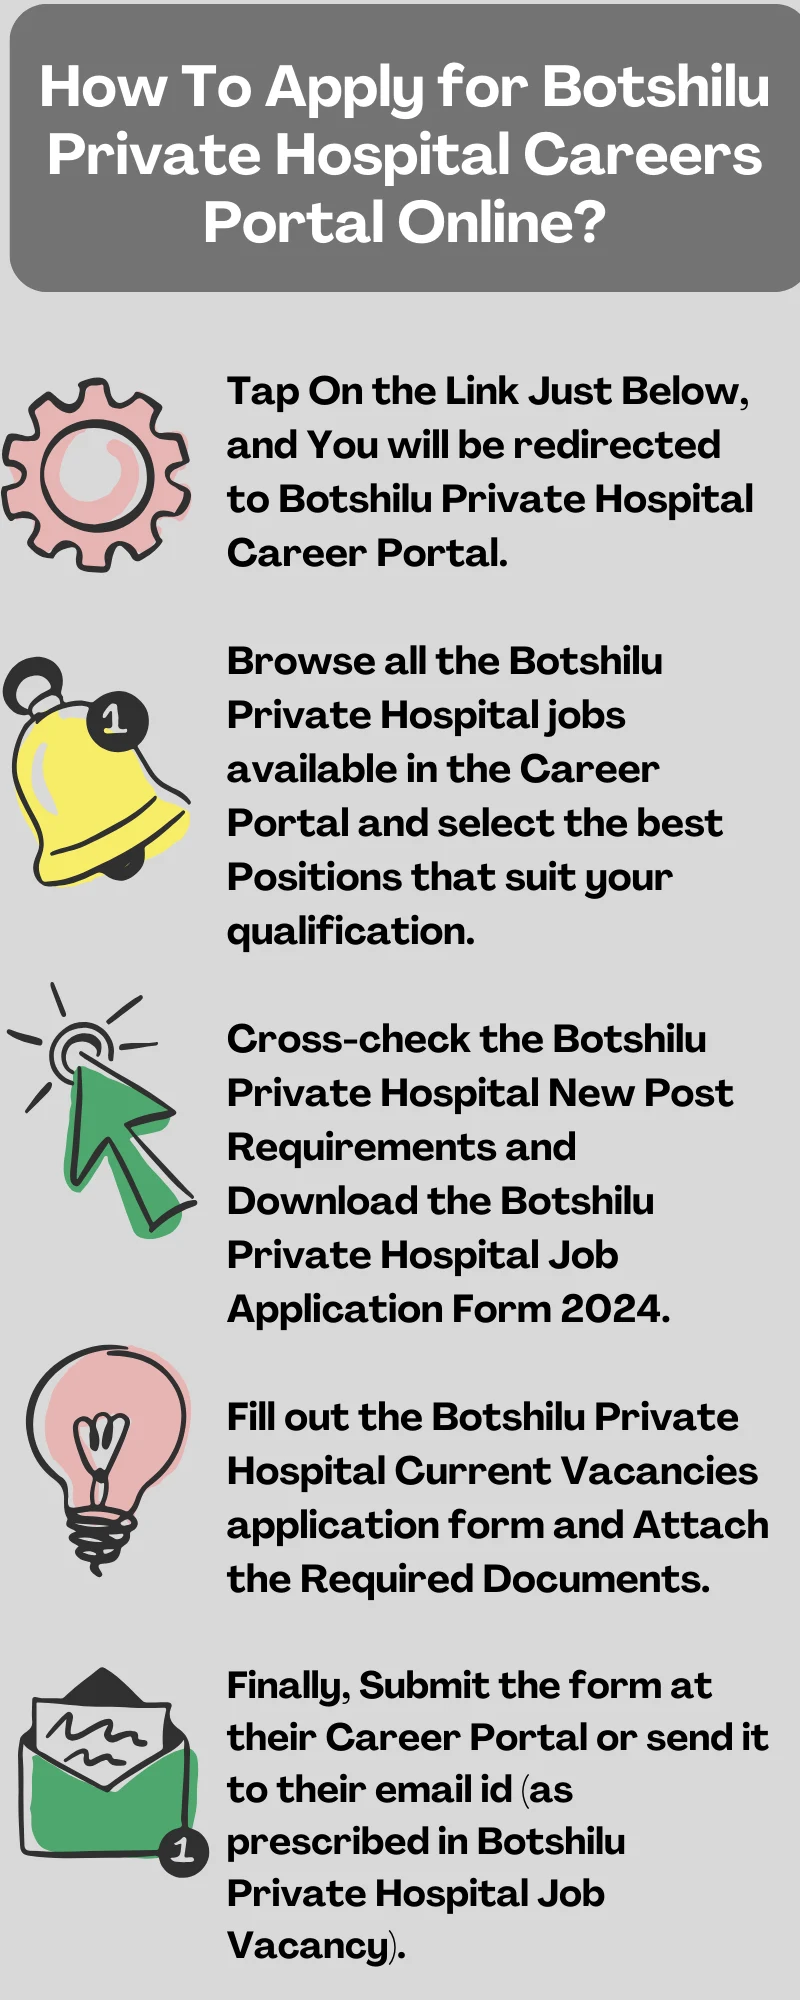 How To Apply for Botshilu Private Hospital Careers Portal Online?